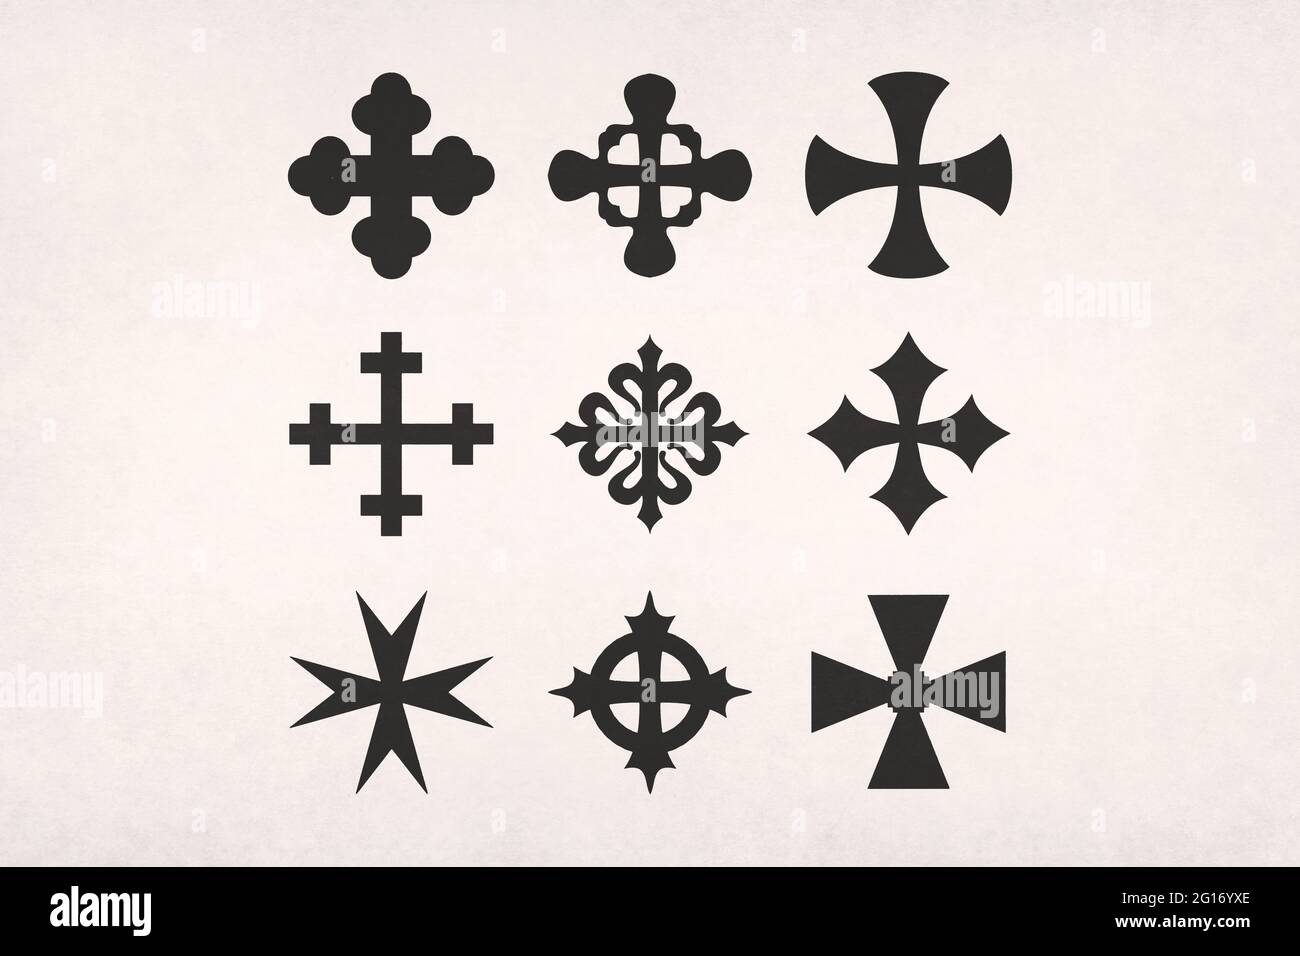 Nine different shape of crosses printed on paper. Stock Photo